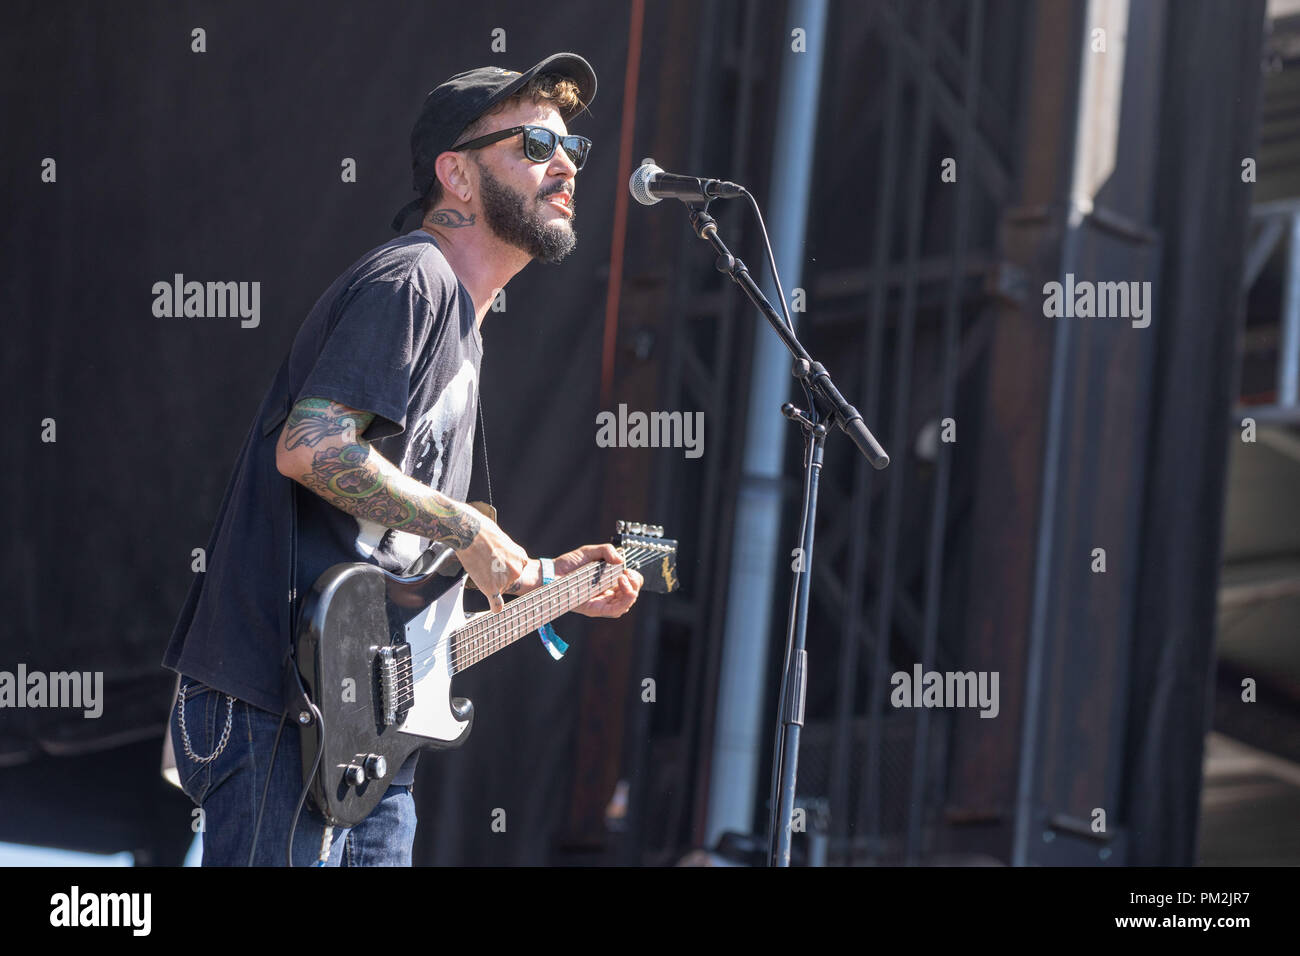 Chicago, Illinois, USA. 15th Sep, 2018. JORDAN CLARK of The Frights during Riot Fest at Douglas Park in Chicago, Illinois Credit: Daniel DeSlover/ZUMA Wire/Alamy Live News Stock Photo